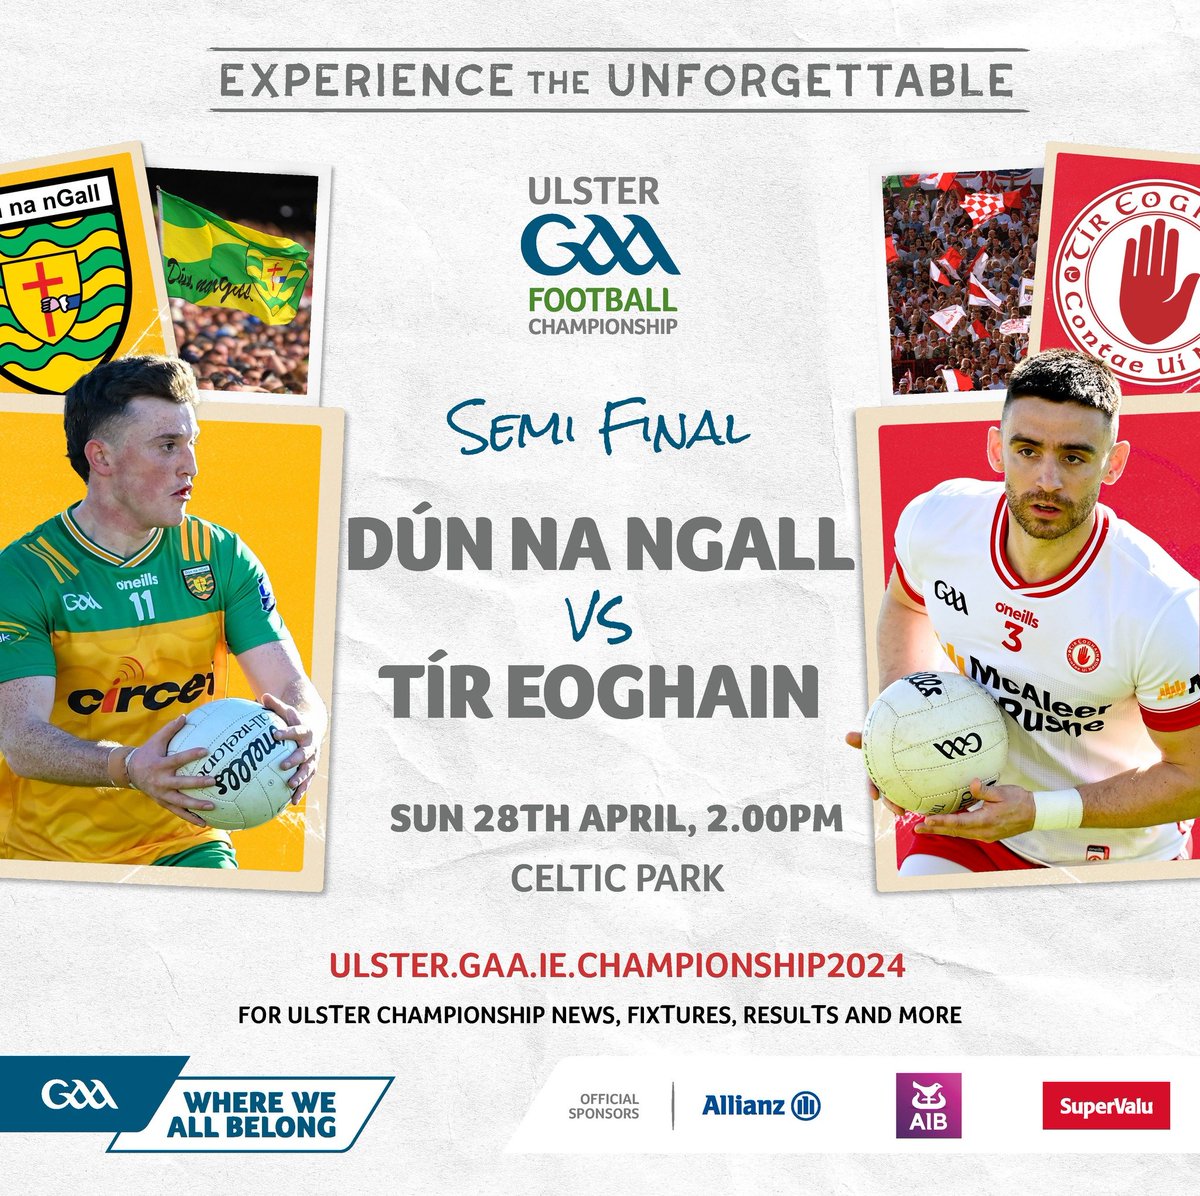 Terrace ticketsstill available for Sunday's Ulster Semi Final.

Certainly dismisses any need to heed the call by some to play the game in Clones so that everyone would get tickets?

#celticpark #greatvenue #bigenough